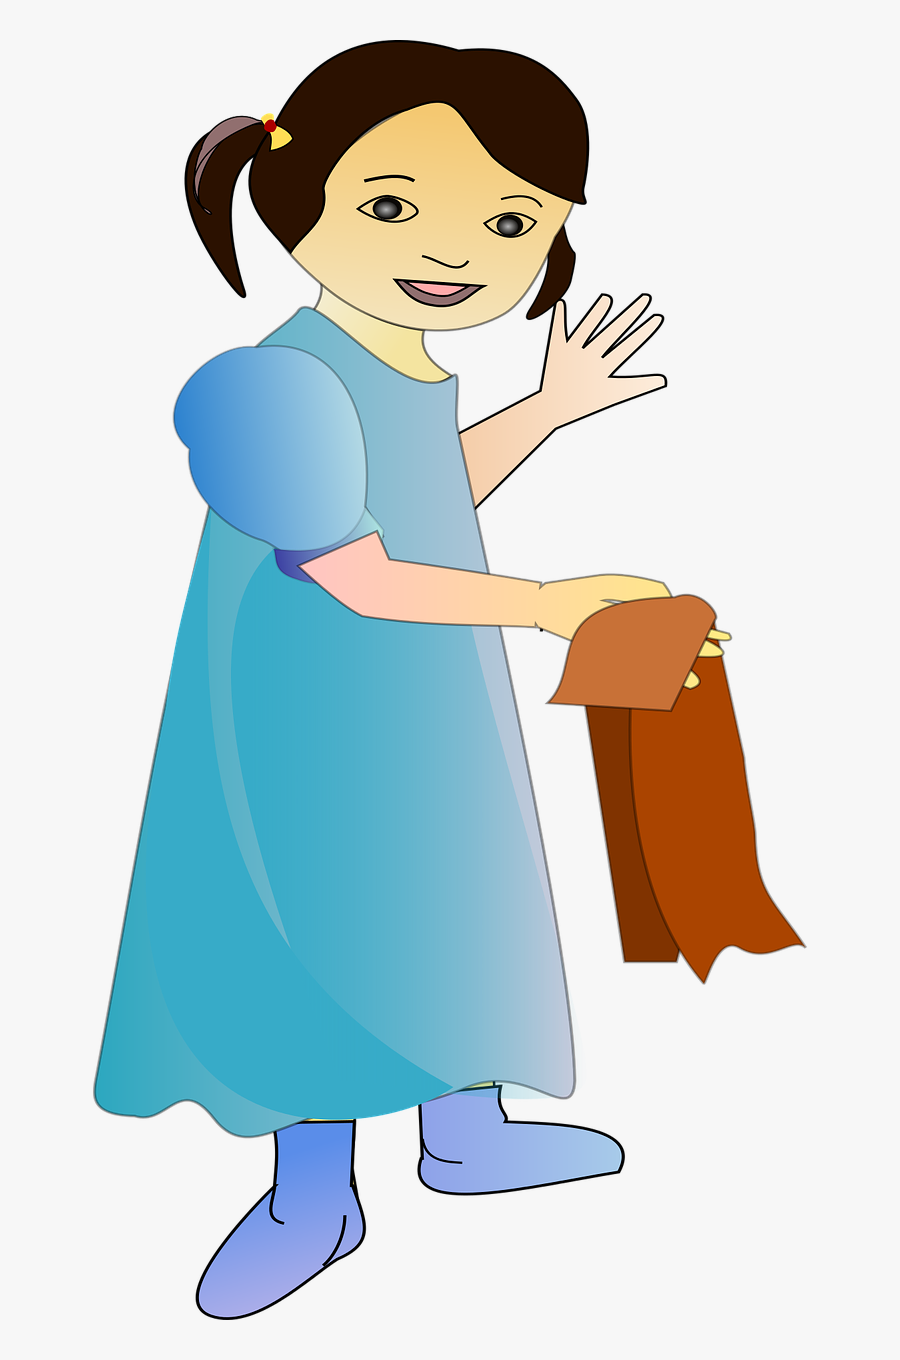 Girl Child Kids Free Picture - Cartoon, Transparent Clipart